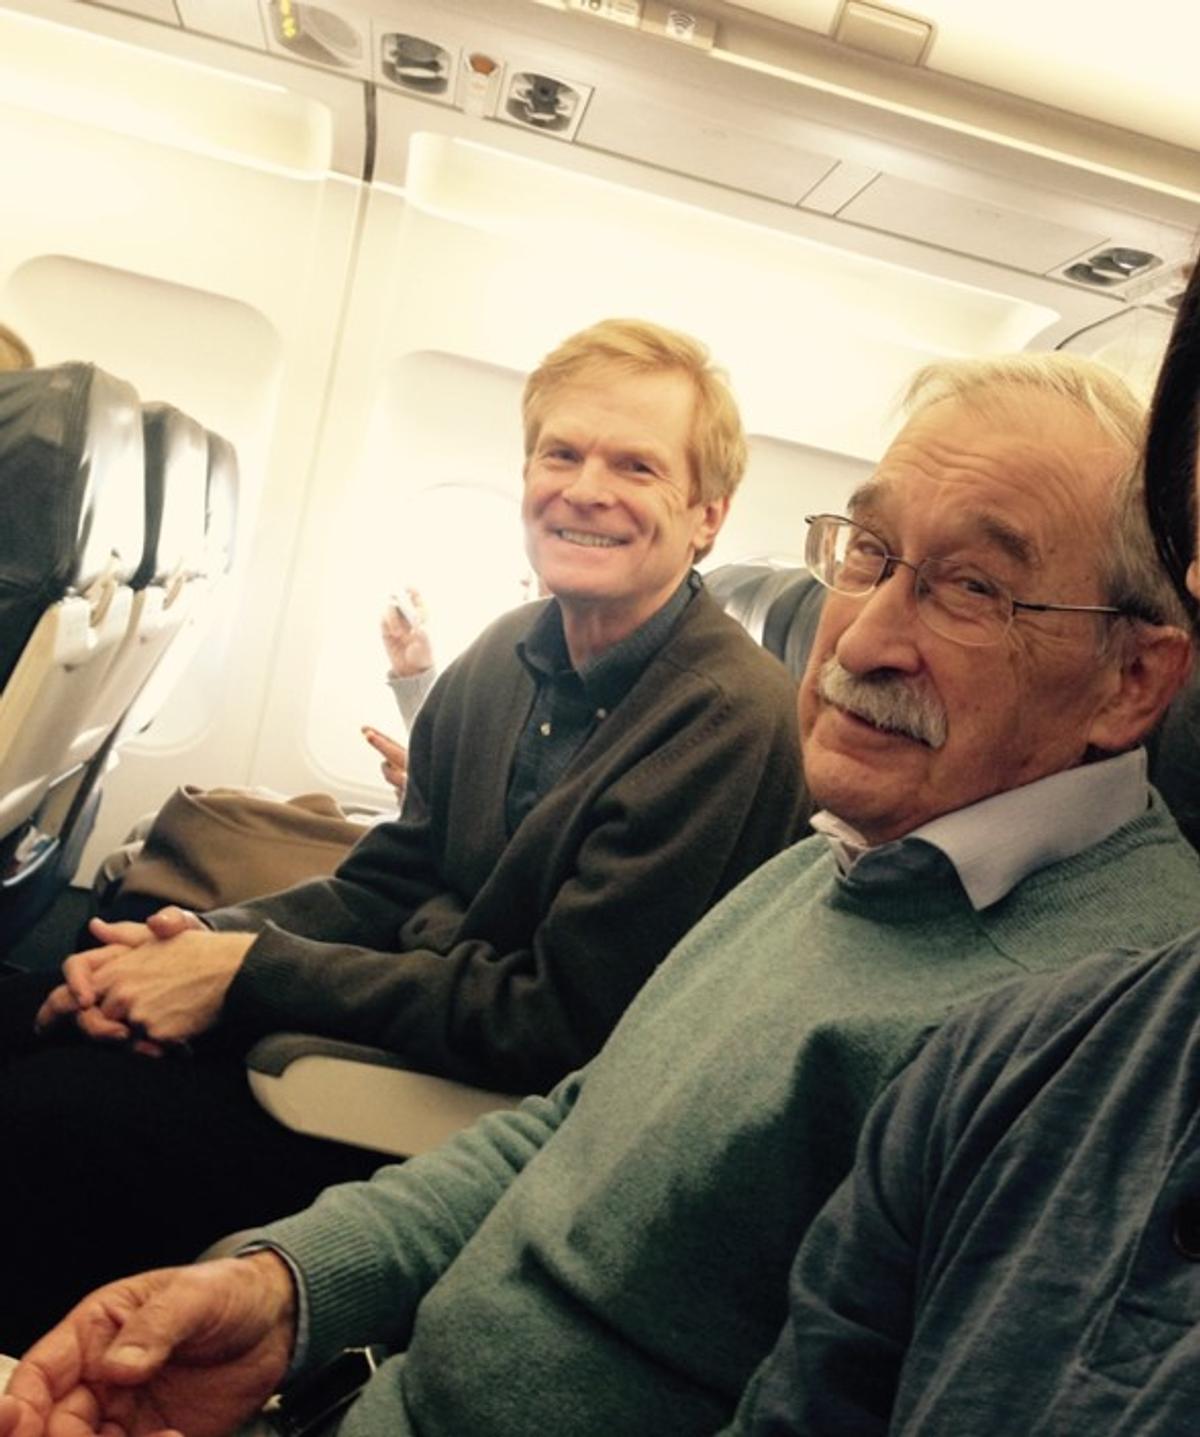 Ray Guillery and I on our way to the Society for Neuroscience conference in 2014. Ray had come through Boston from England, giving lectures at Harvard and MIT, and then received the Palay award at SFN. (picture by Kutay Deniz Atabay)